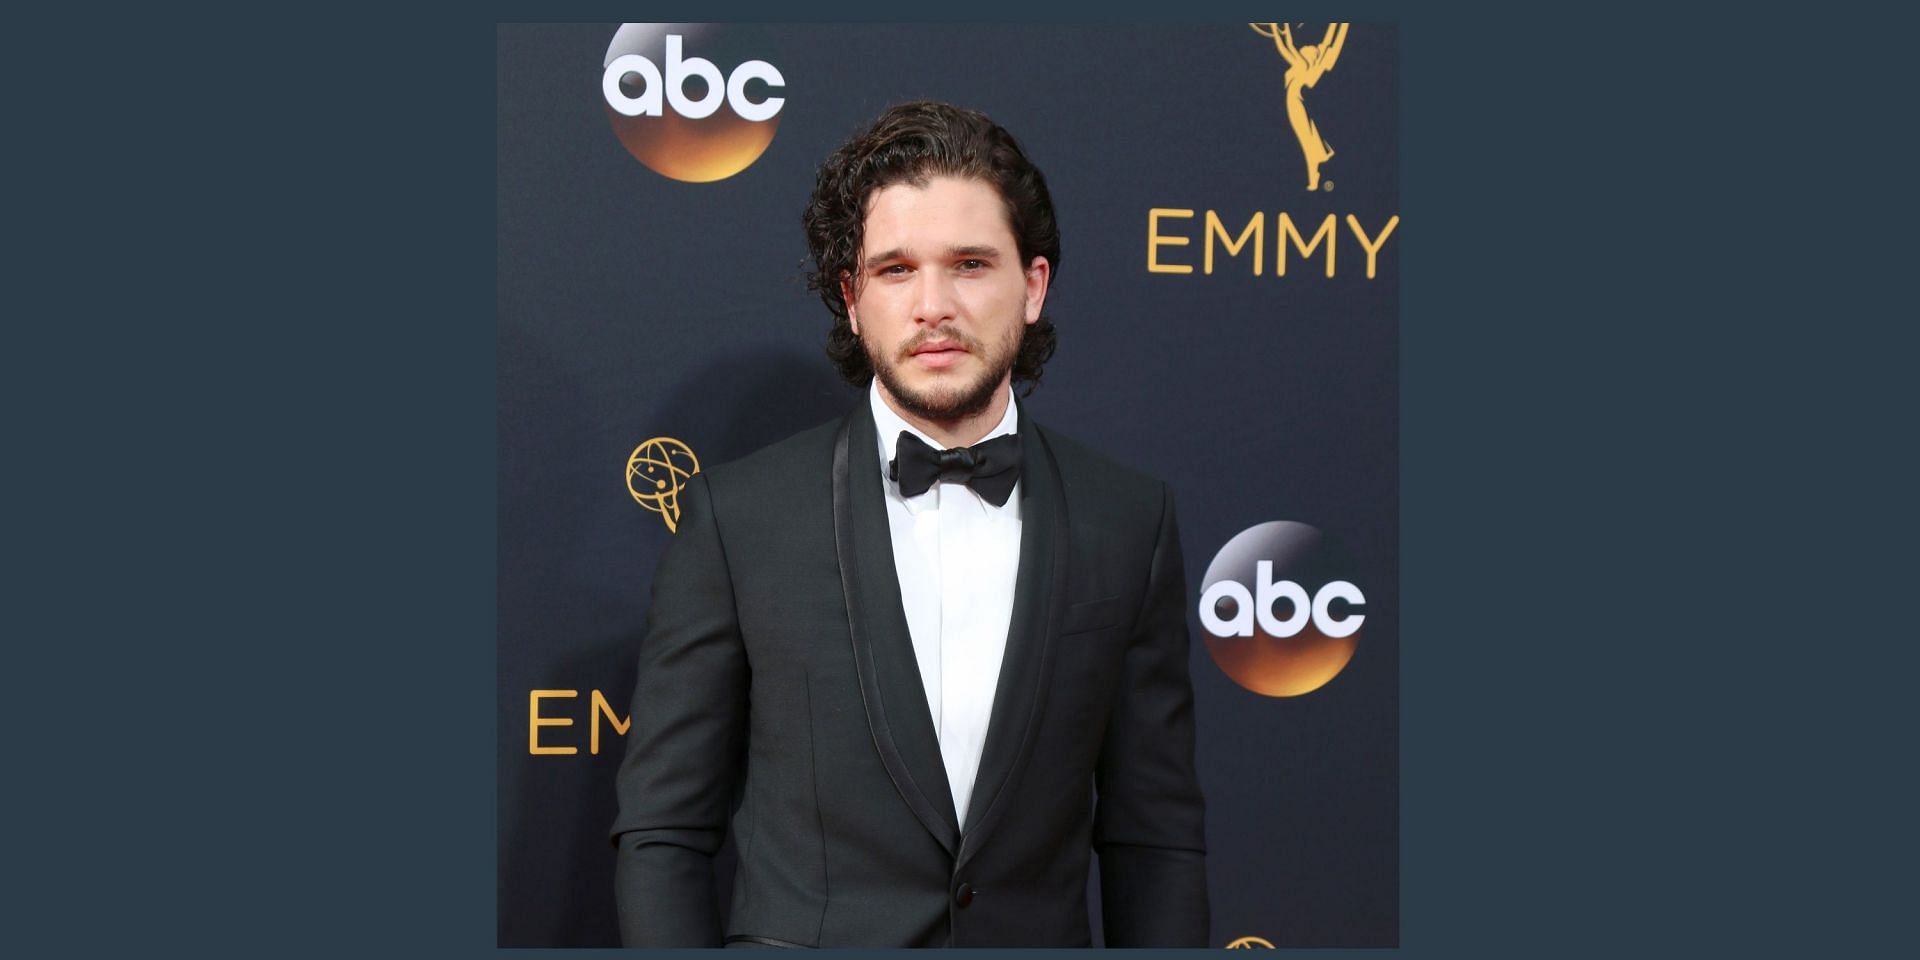 Kit Harington has opened up about being neurodivergent in a new podcast. (Image via Vecteezy/ Kathy Hutchins)